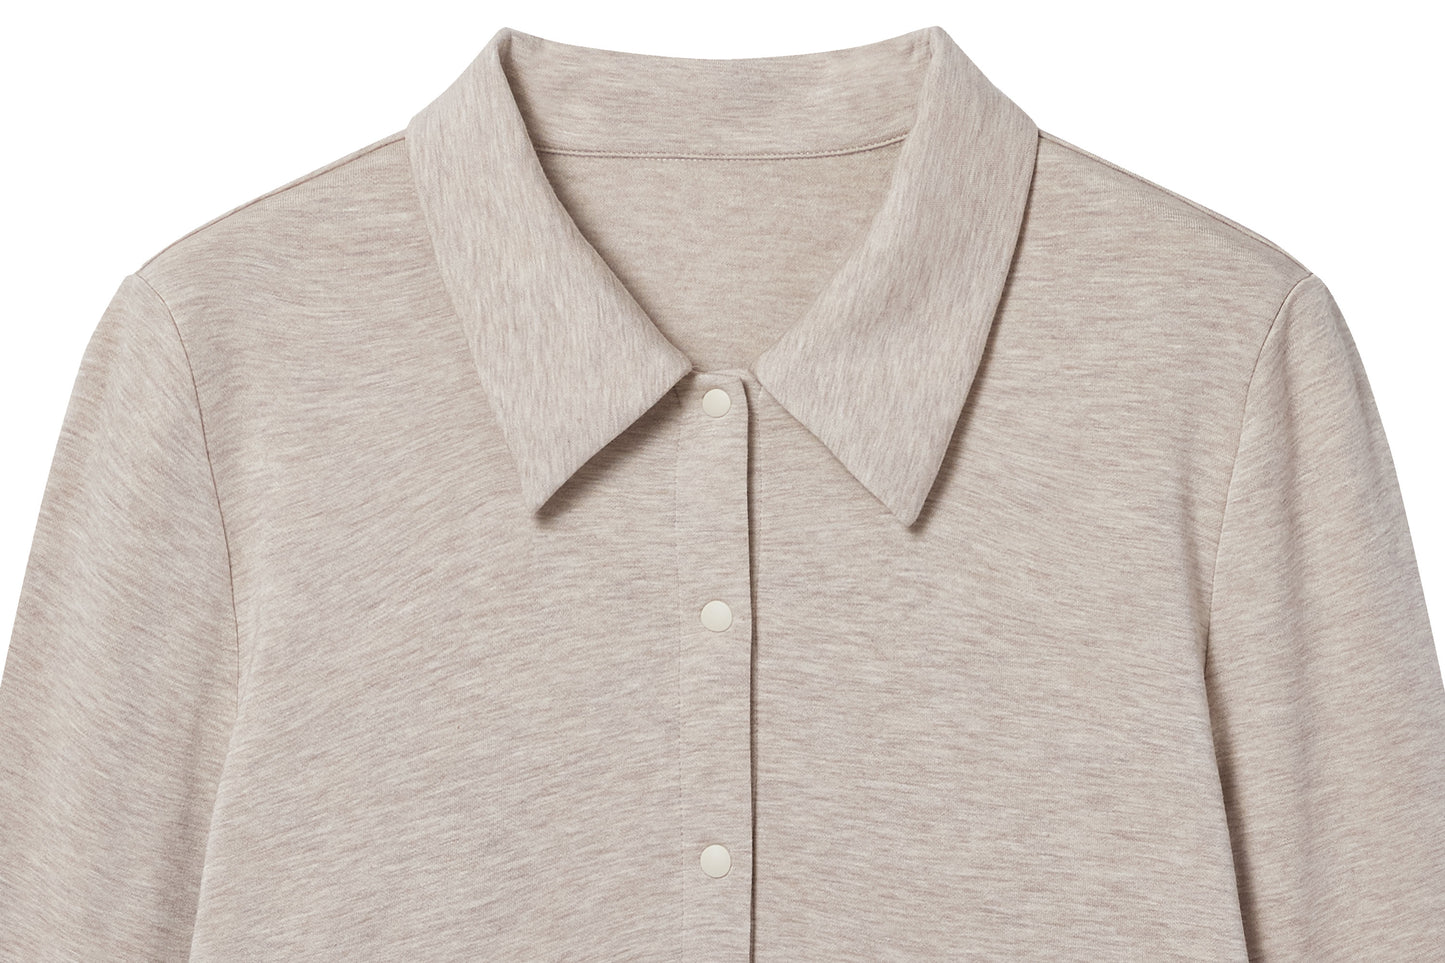 Basics Women's Fitted Button-Up Shirt (Bamboo Tanboocel) - Warm Taupe